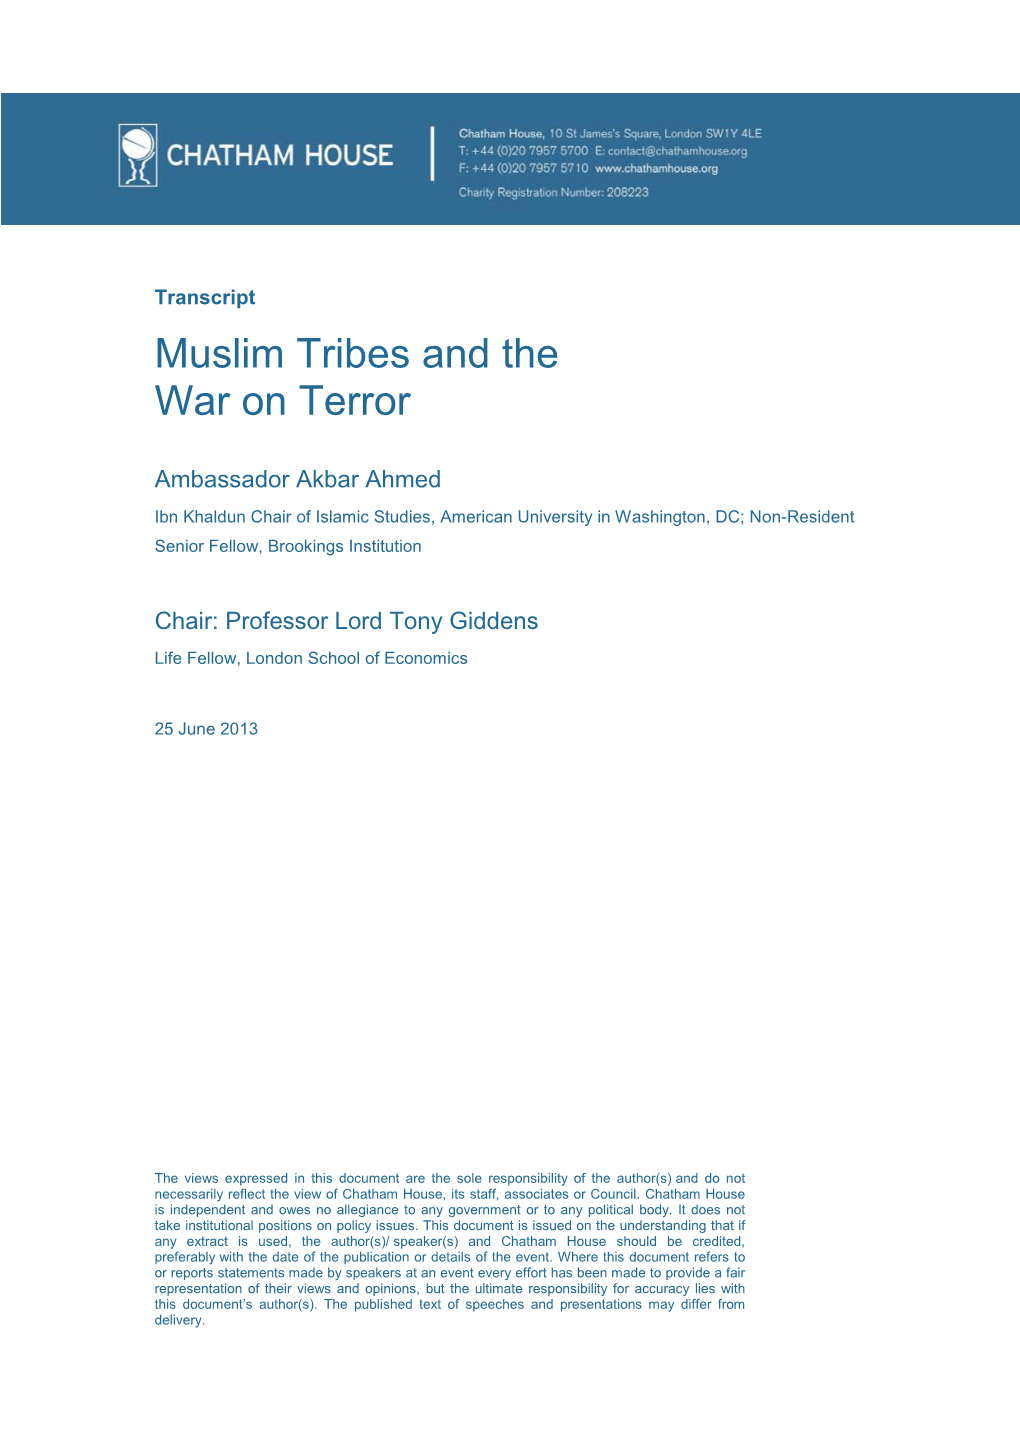 Muslim Tribes and the War on Terror